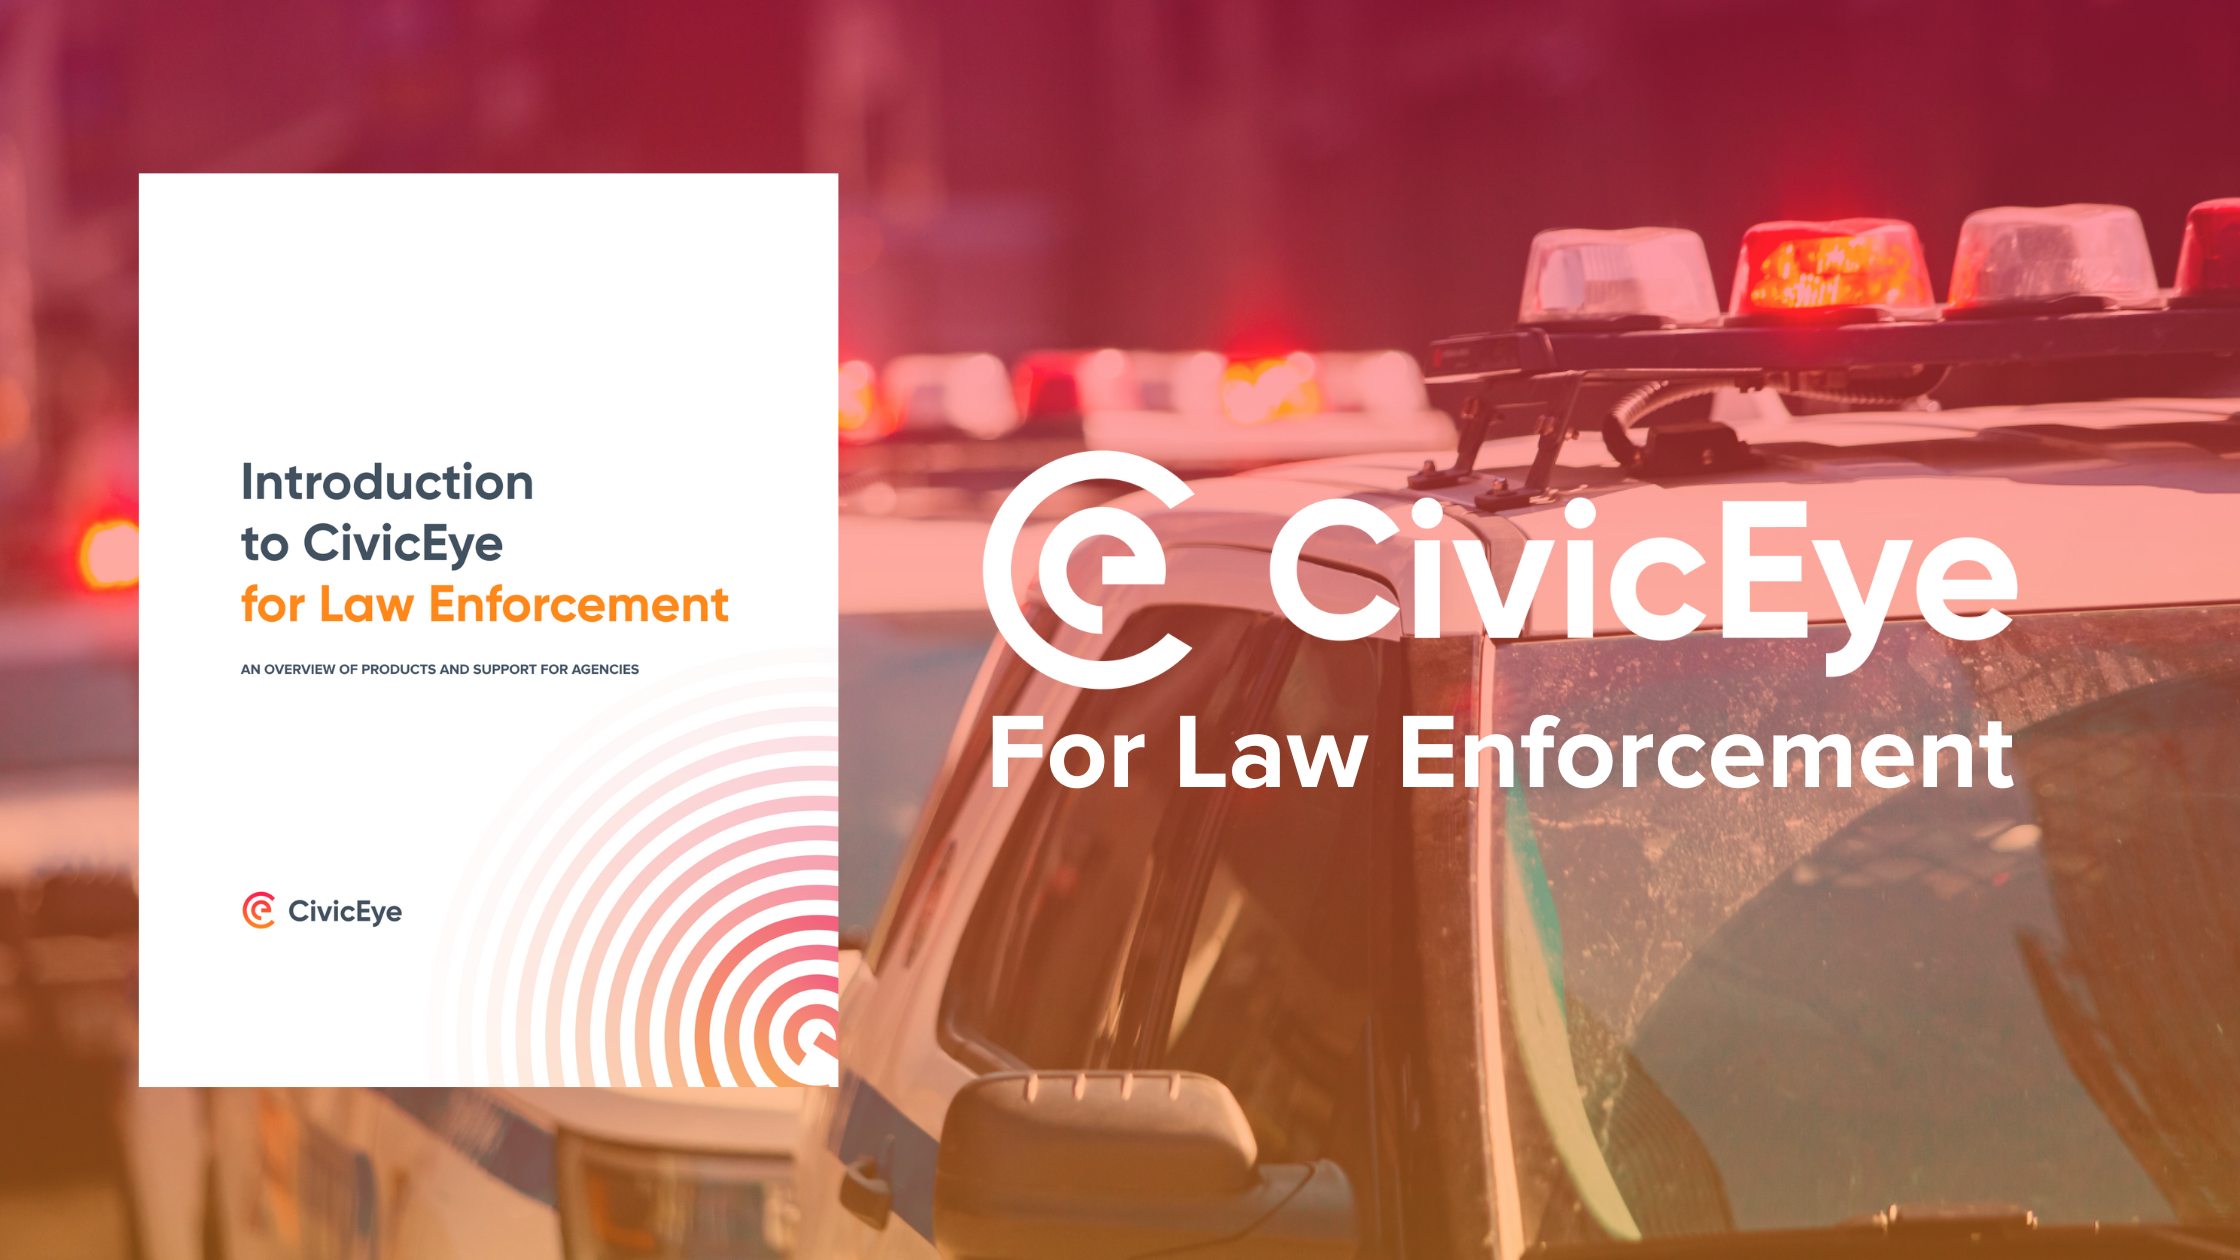 Check out this free eGuide to learn about the technology by CivicEye for law enforcement, such as CivicRMS.